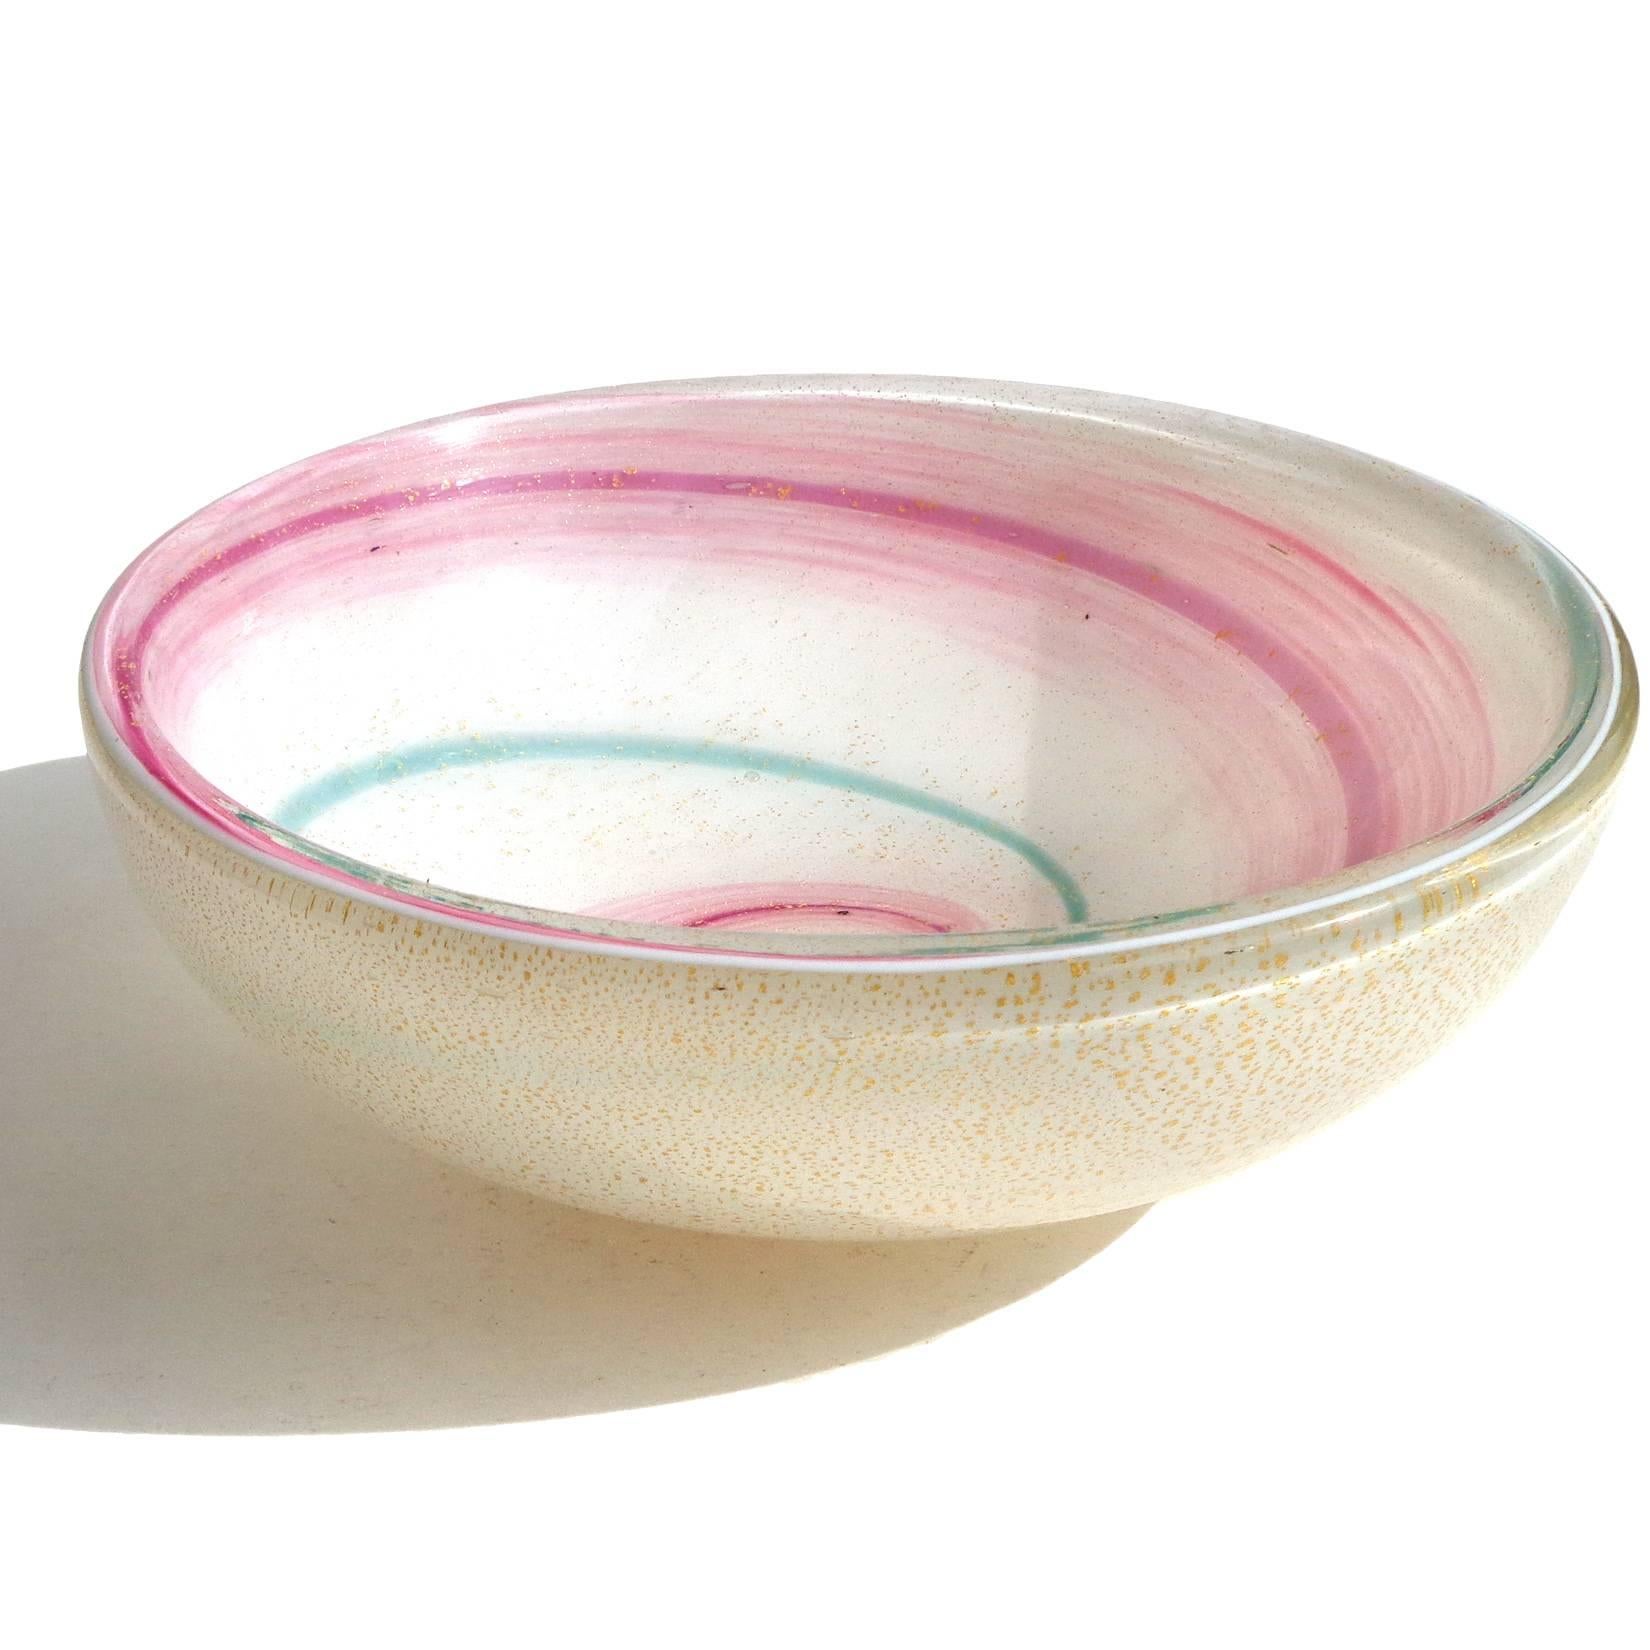 Beautiful Murano hand blown white, gold flecks, pink and aqua green swirl Italian art glass bowl. The piece is covered inside and out with heavy gold leaf. Still retains a partial label underneath, with 